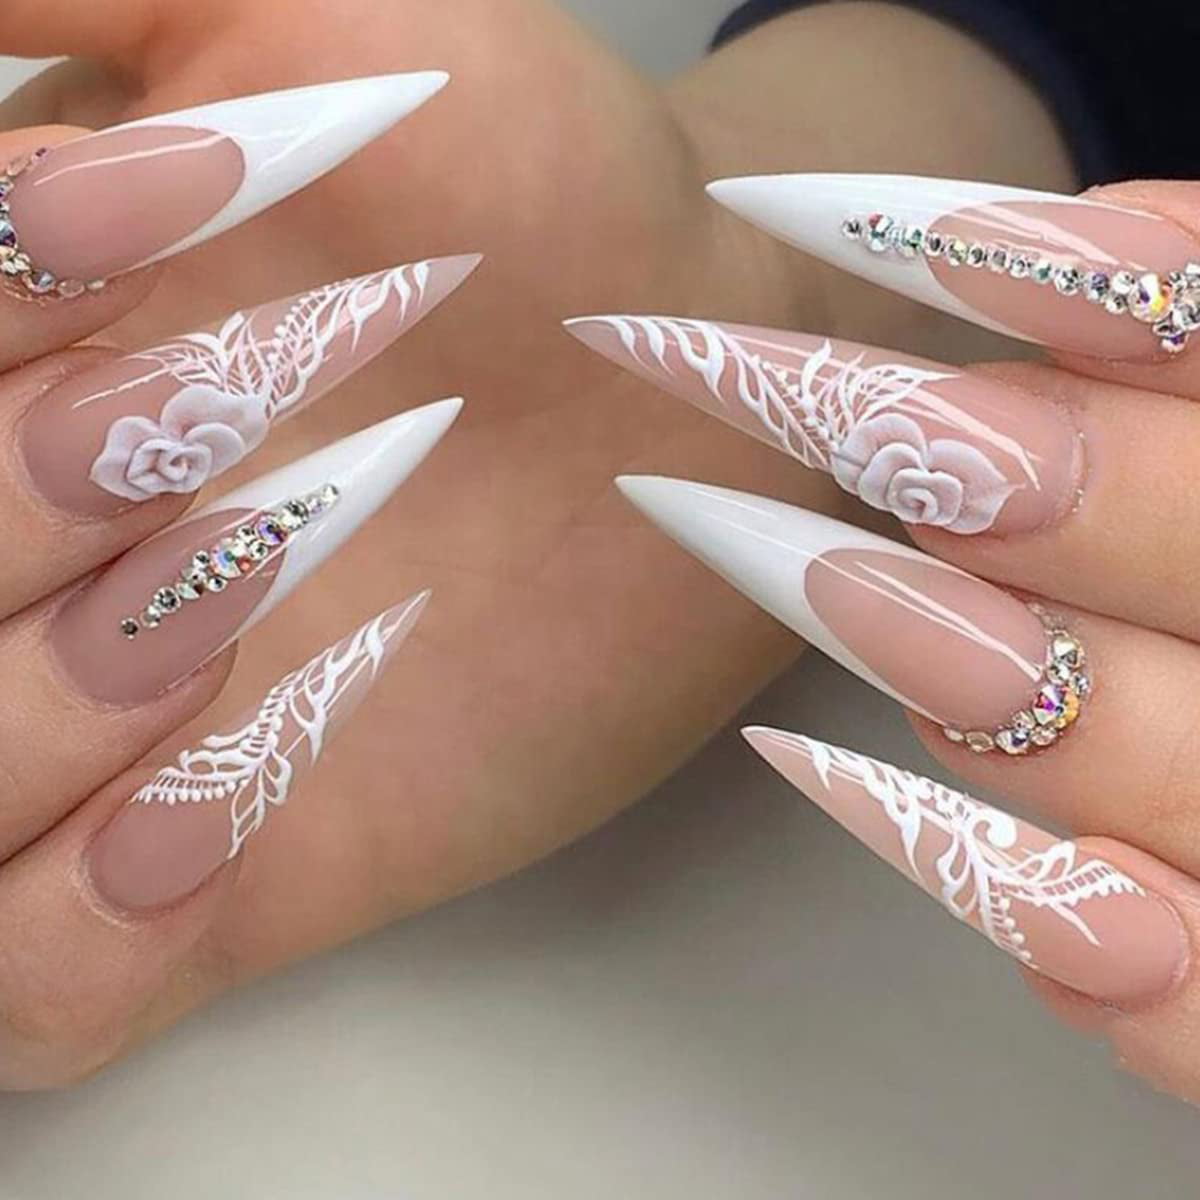 Monochrome pointed “French” nails : r/RedditLaqueristas